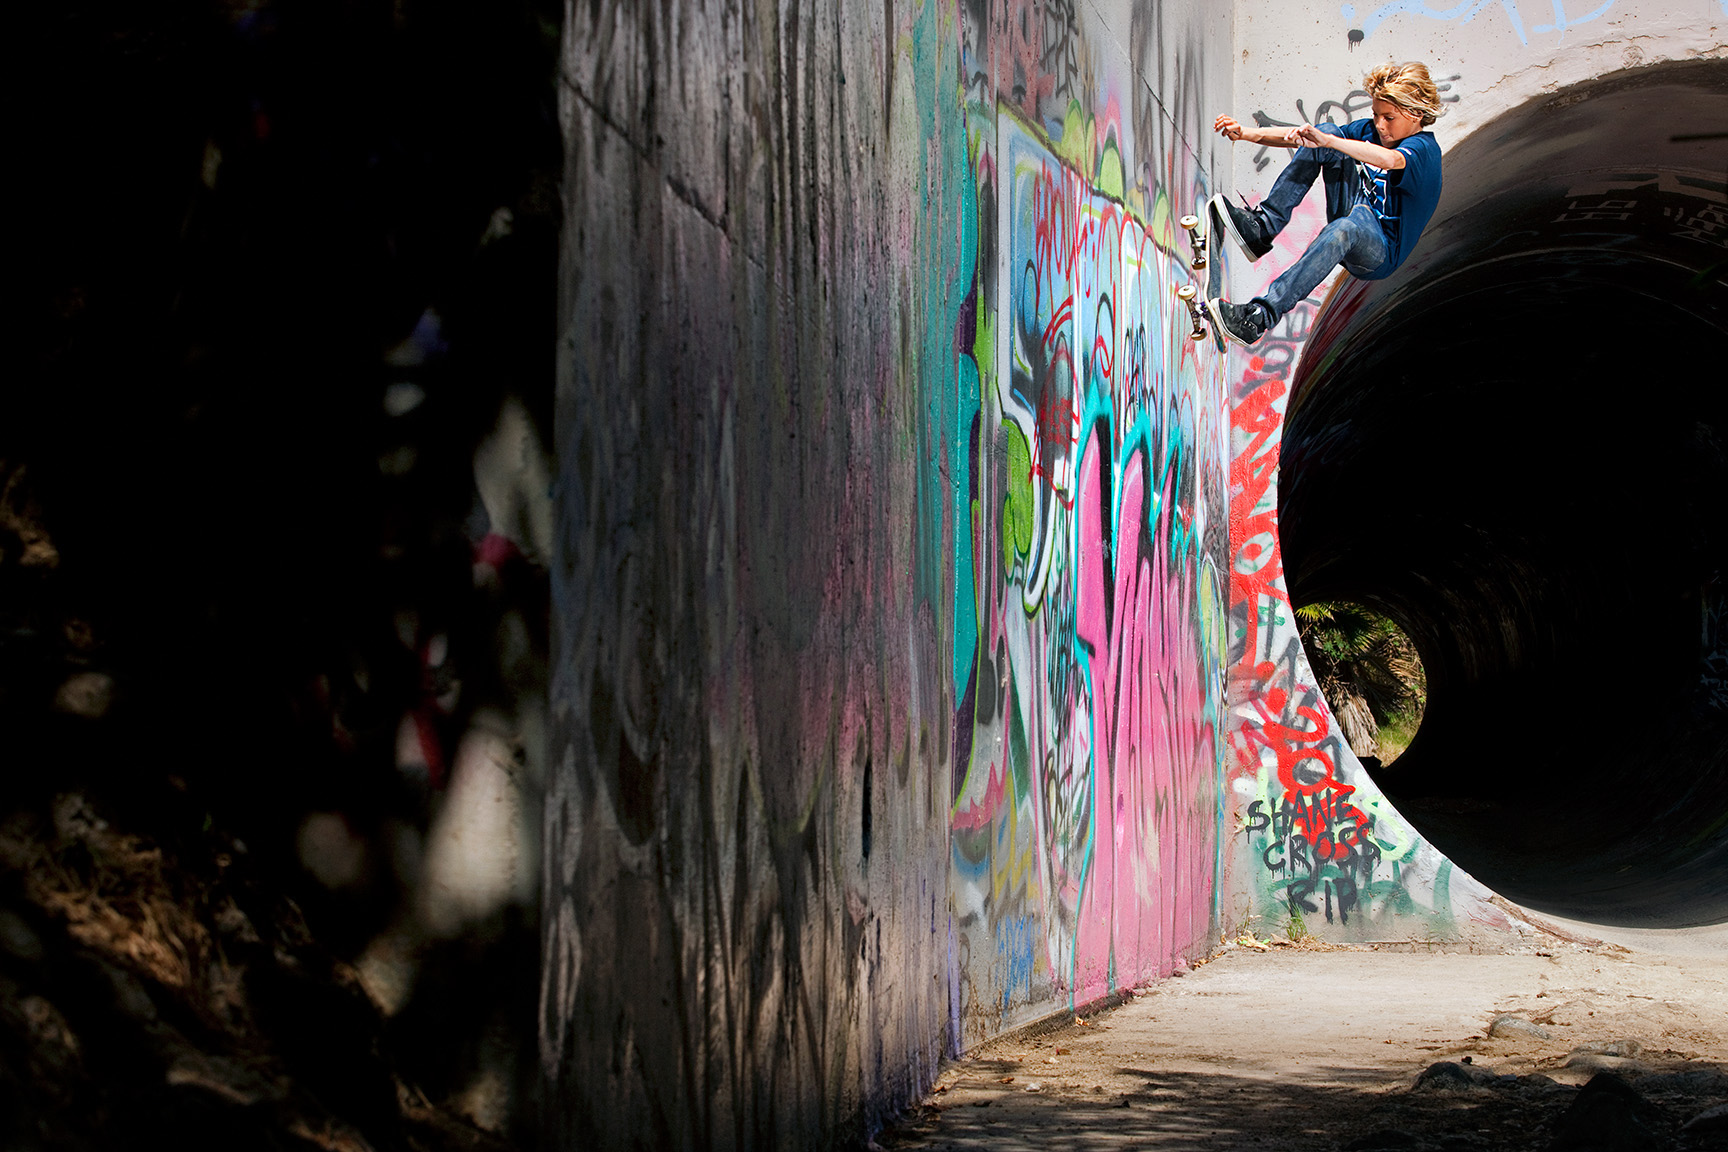 Catching The Skate Bug Gallery Here And Now With Curren Caples X Games